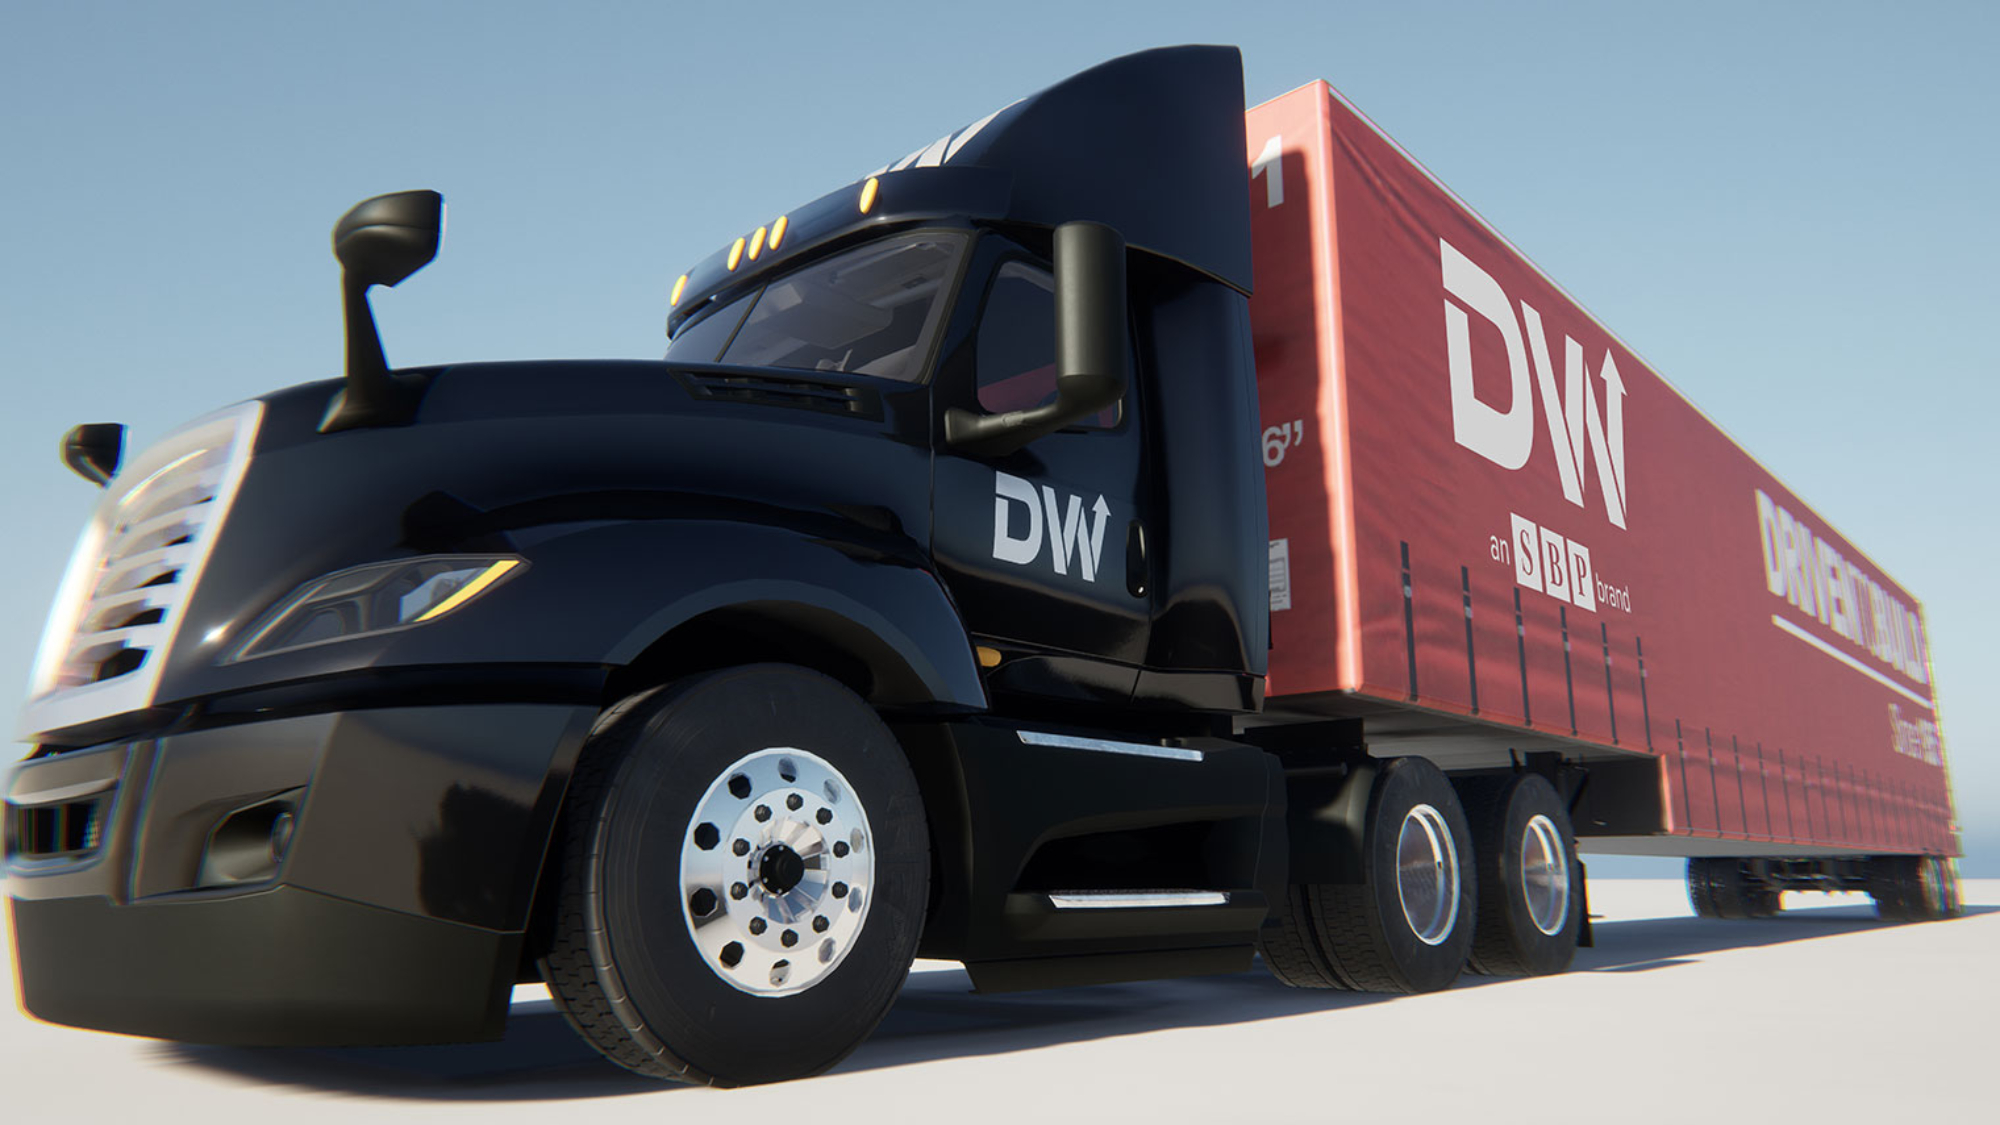 Read our comprehensive review of DW Distribution, a leading provider of building materials distribution. Discover their commitment to excellence, extensive product range, and exceptional customer service. Partner with Gott Marketing for all your building materials distribution and marketing needs